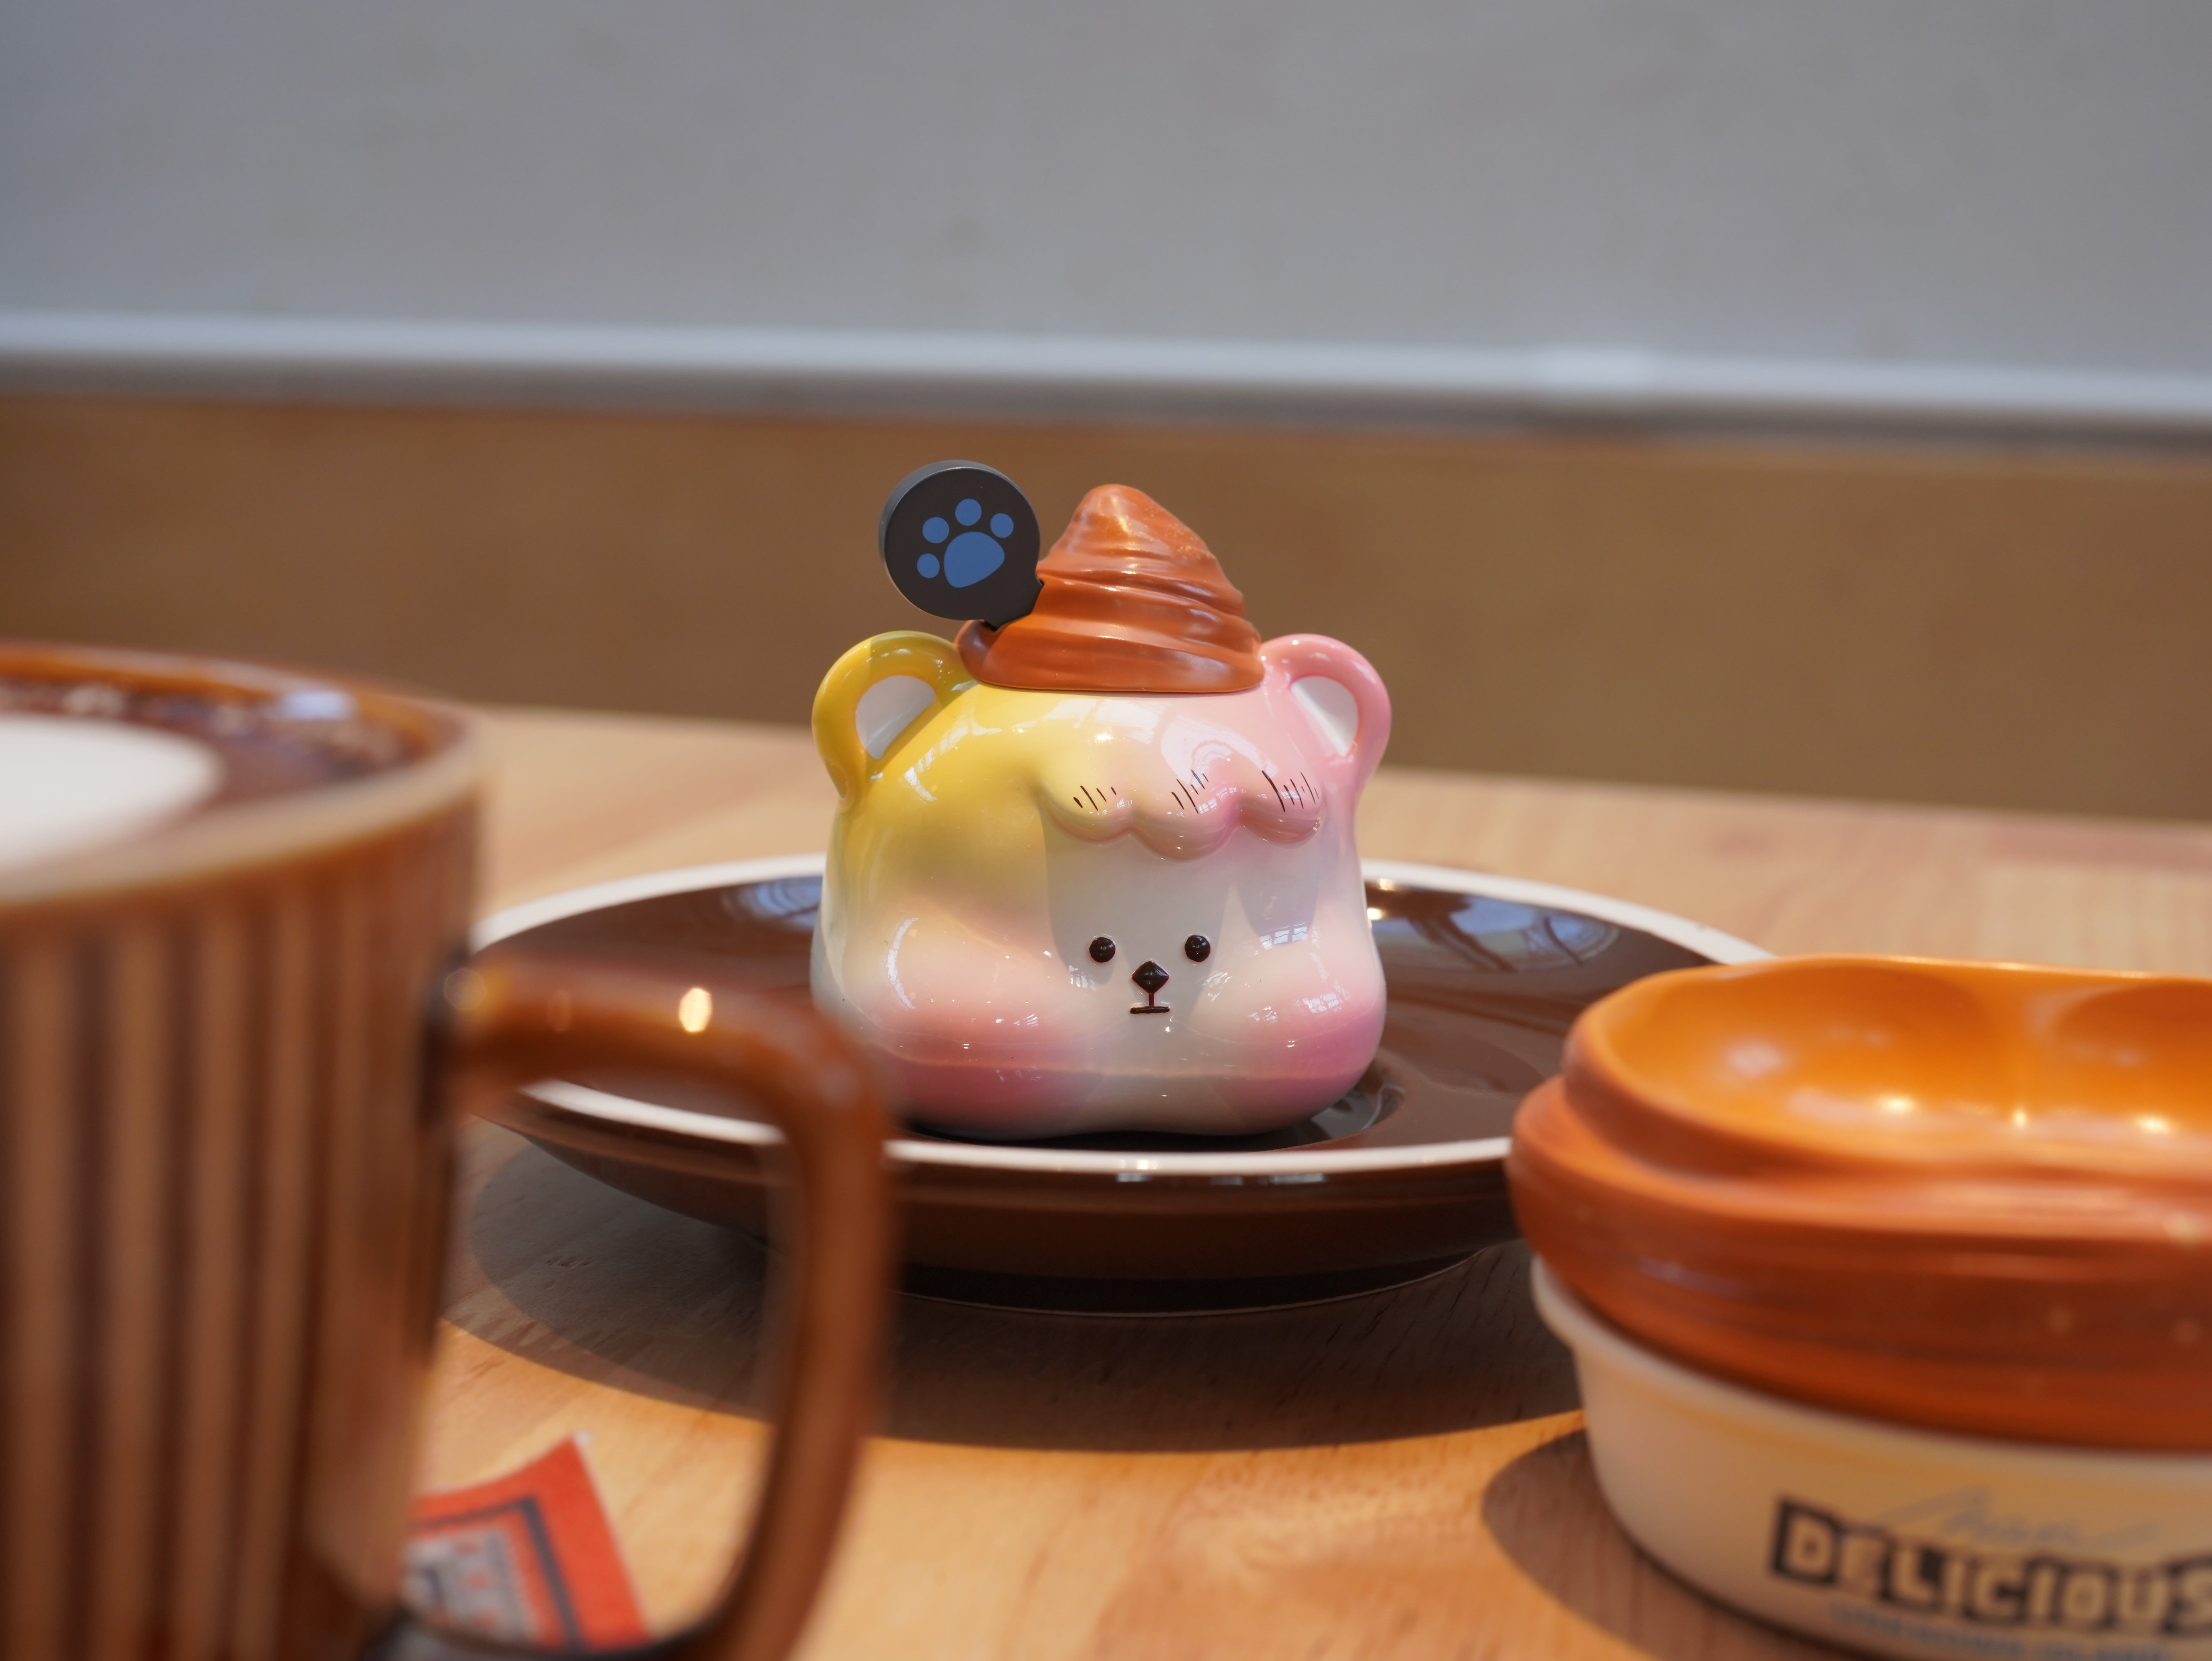 Croissant Han Han ceramic teacup on saucer, resin material, close-up of cup and plate, small bear-shaped object with hat, container detail.